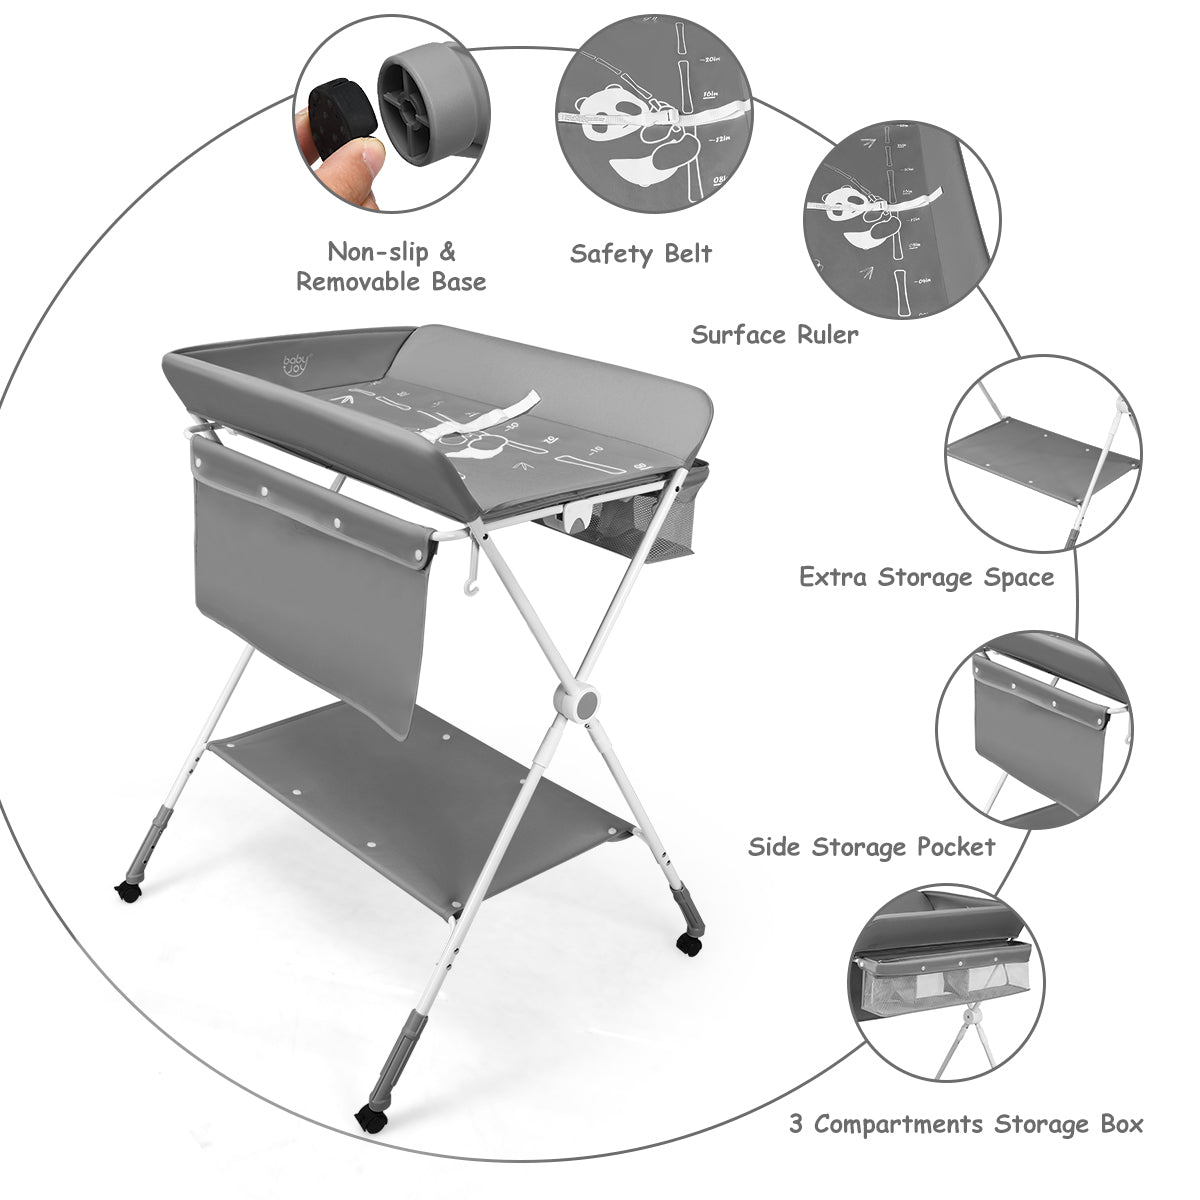 Comfortable Portable Diaper Changing Station - Grey Convenience for Families